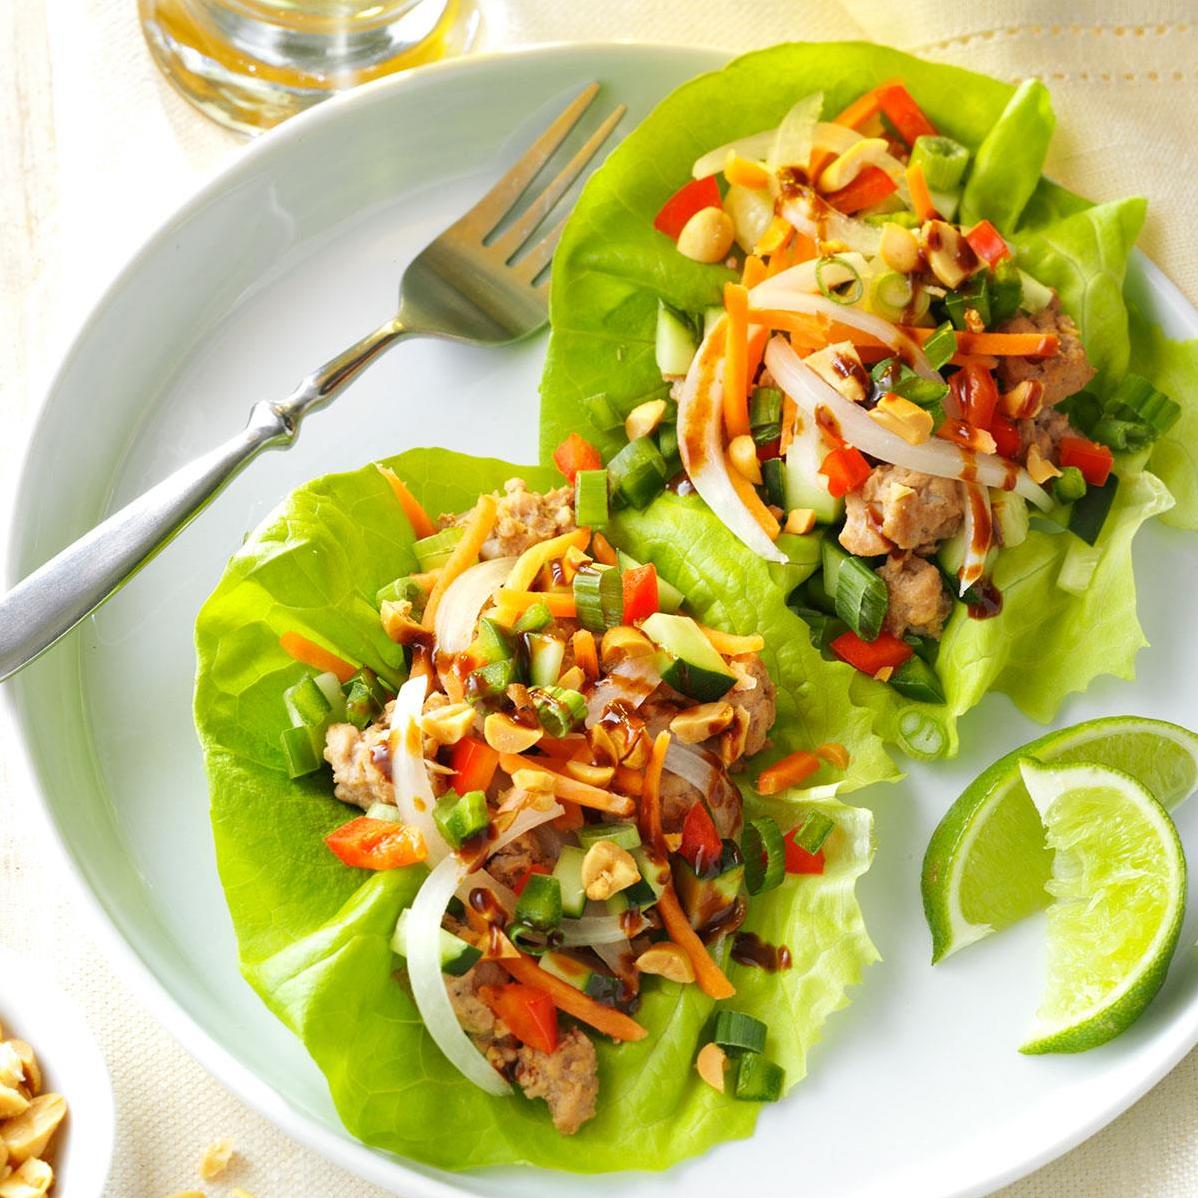  These healthy, refreshing wraps are not only visually appealing but also packed with charming Vietnamese flavors!